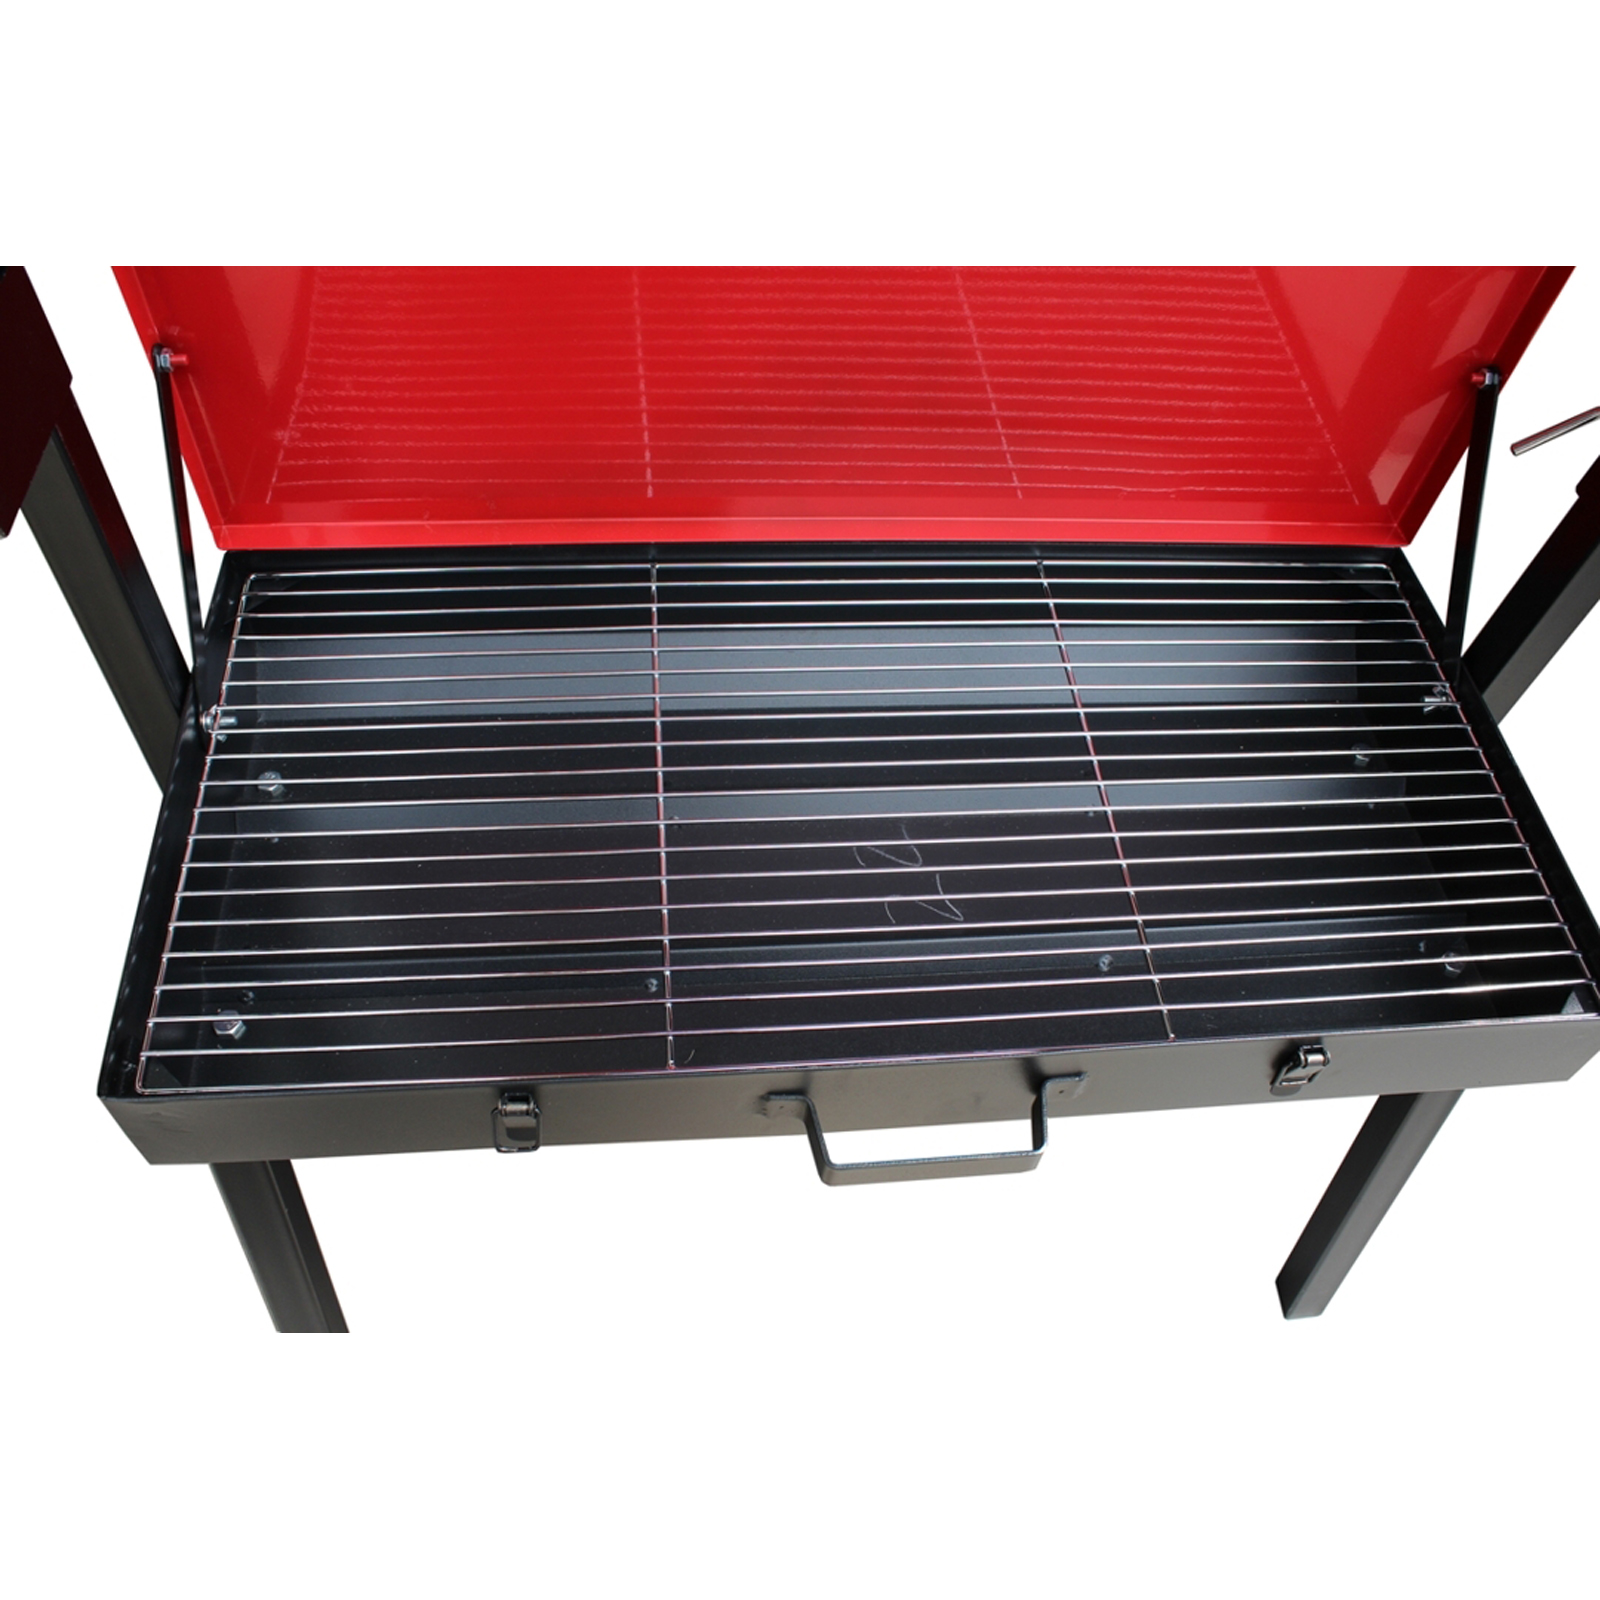 Portable BBQ Rotisserie with Red Lid - PBR-3060 (Factory Second)